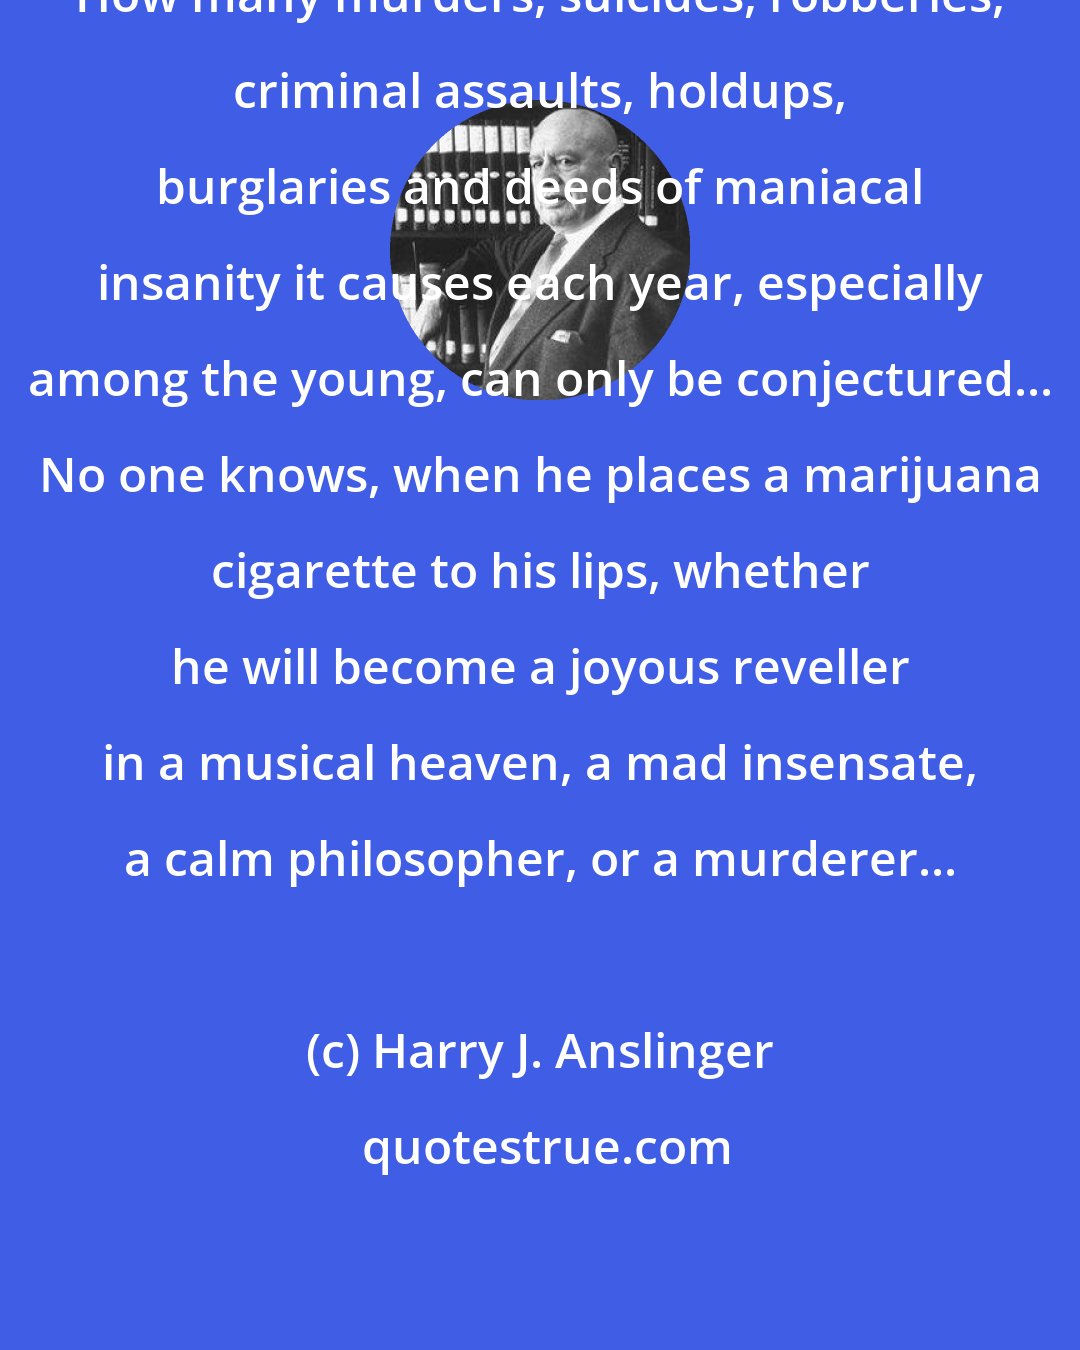 Harry J. Anslinger: How many murders, suicides, robberies, criminal assaults, holdups, burglaries and deeds of maniacal insanity it causes each year, especially among the young, can only be conjectured... No one knows, when he places a marijuana cigarette to his lips, whether he will become a joyous reveller in a musical heaven, a mad insensate, a calm philosopher, or a murderer...